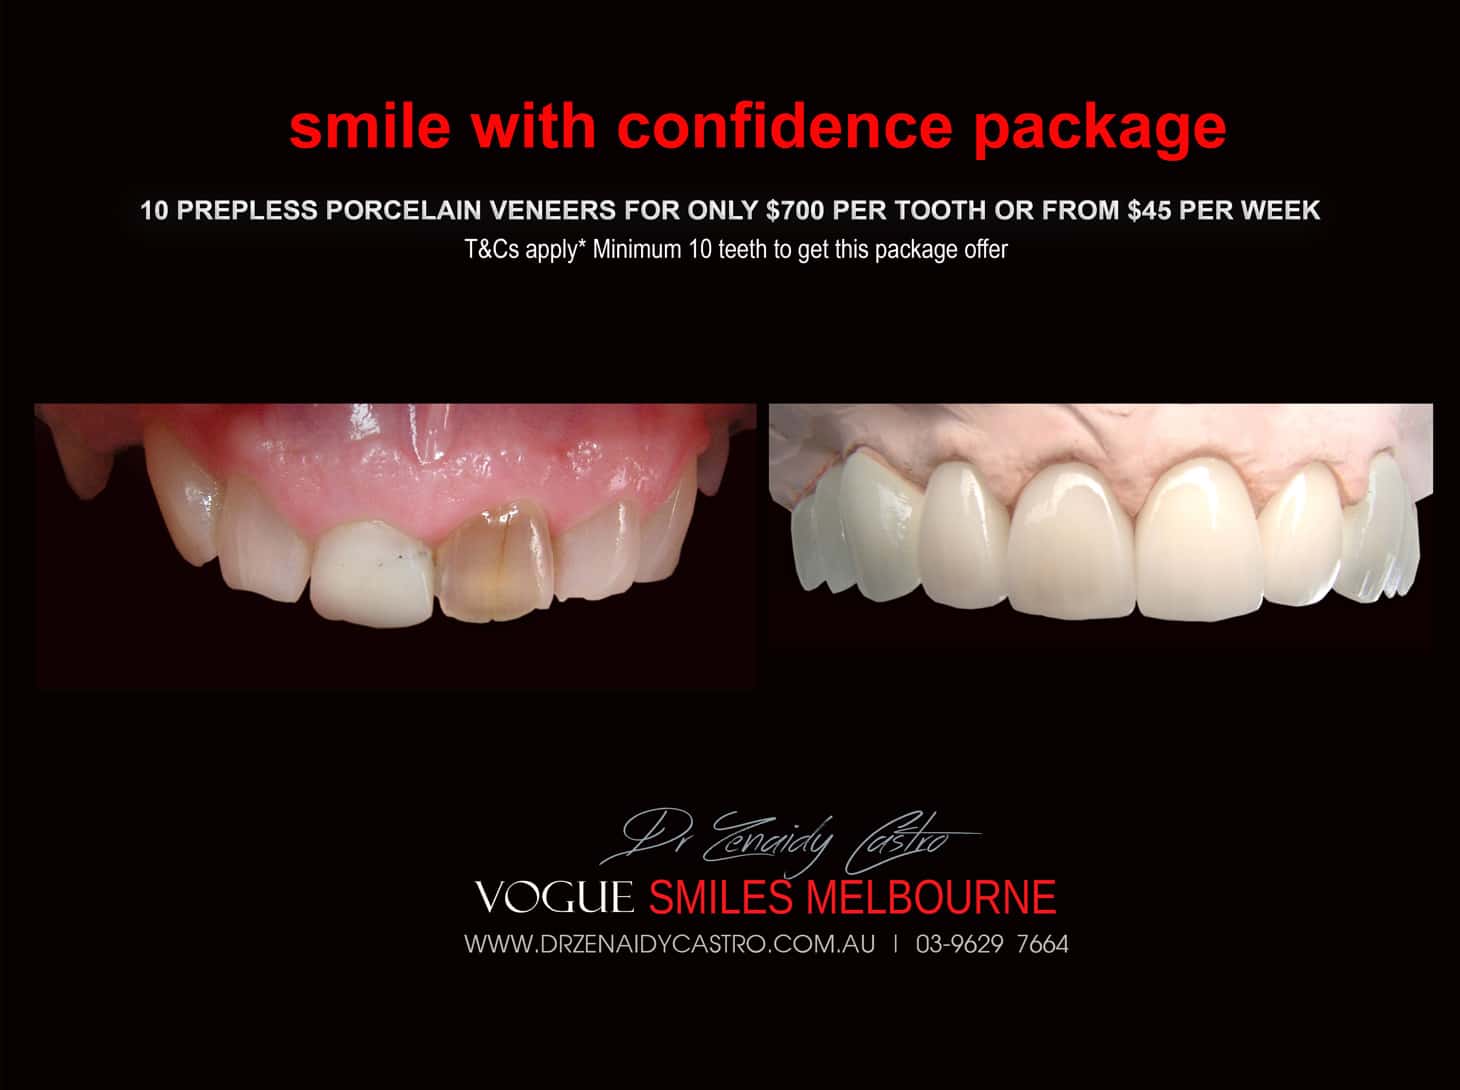 Black Tooth treatment- Dead Front tooth Treatment With Porcelain Veneers Melbourne CBD Cosmetic Dentist